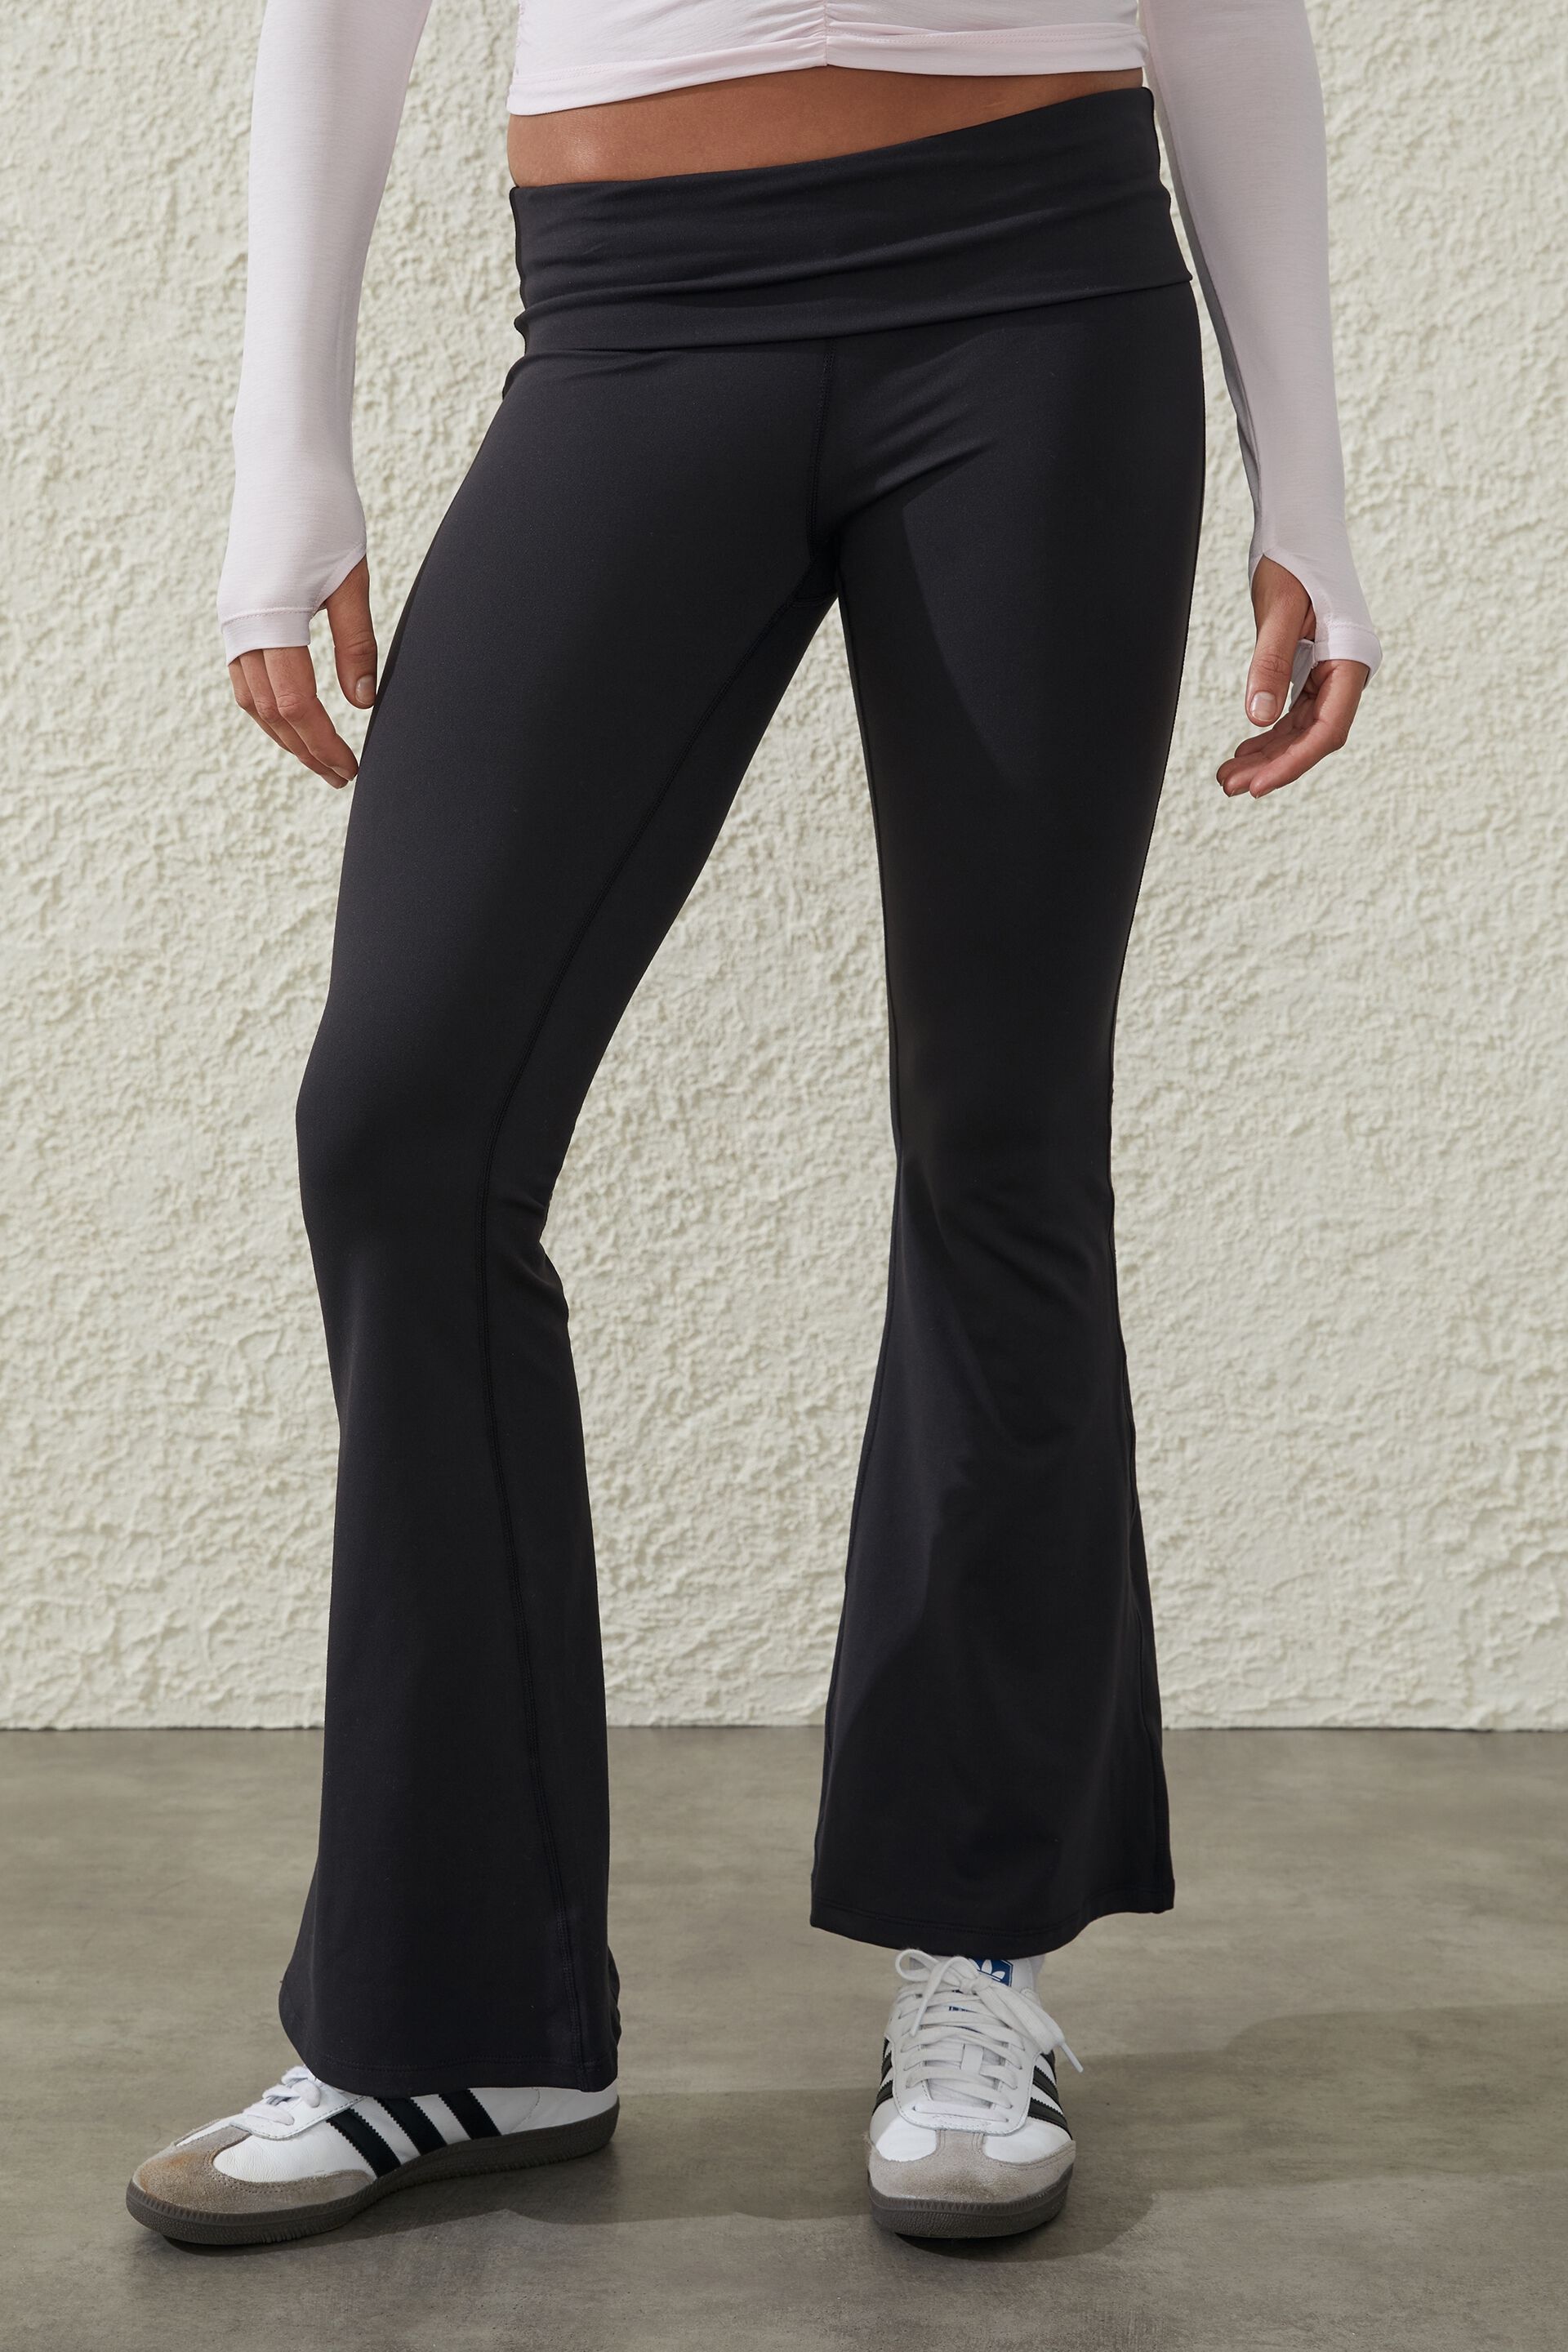 Bell Bottoms Yoga Pants Black Lace Detailed Flare | Zoozie LA